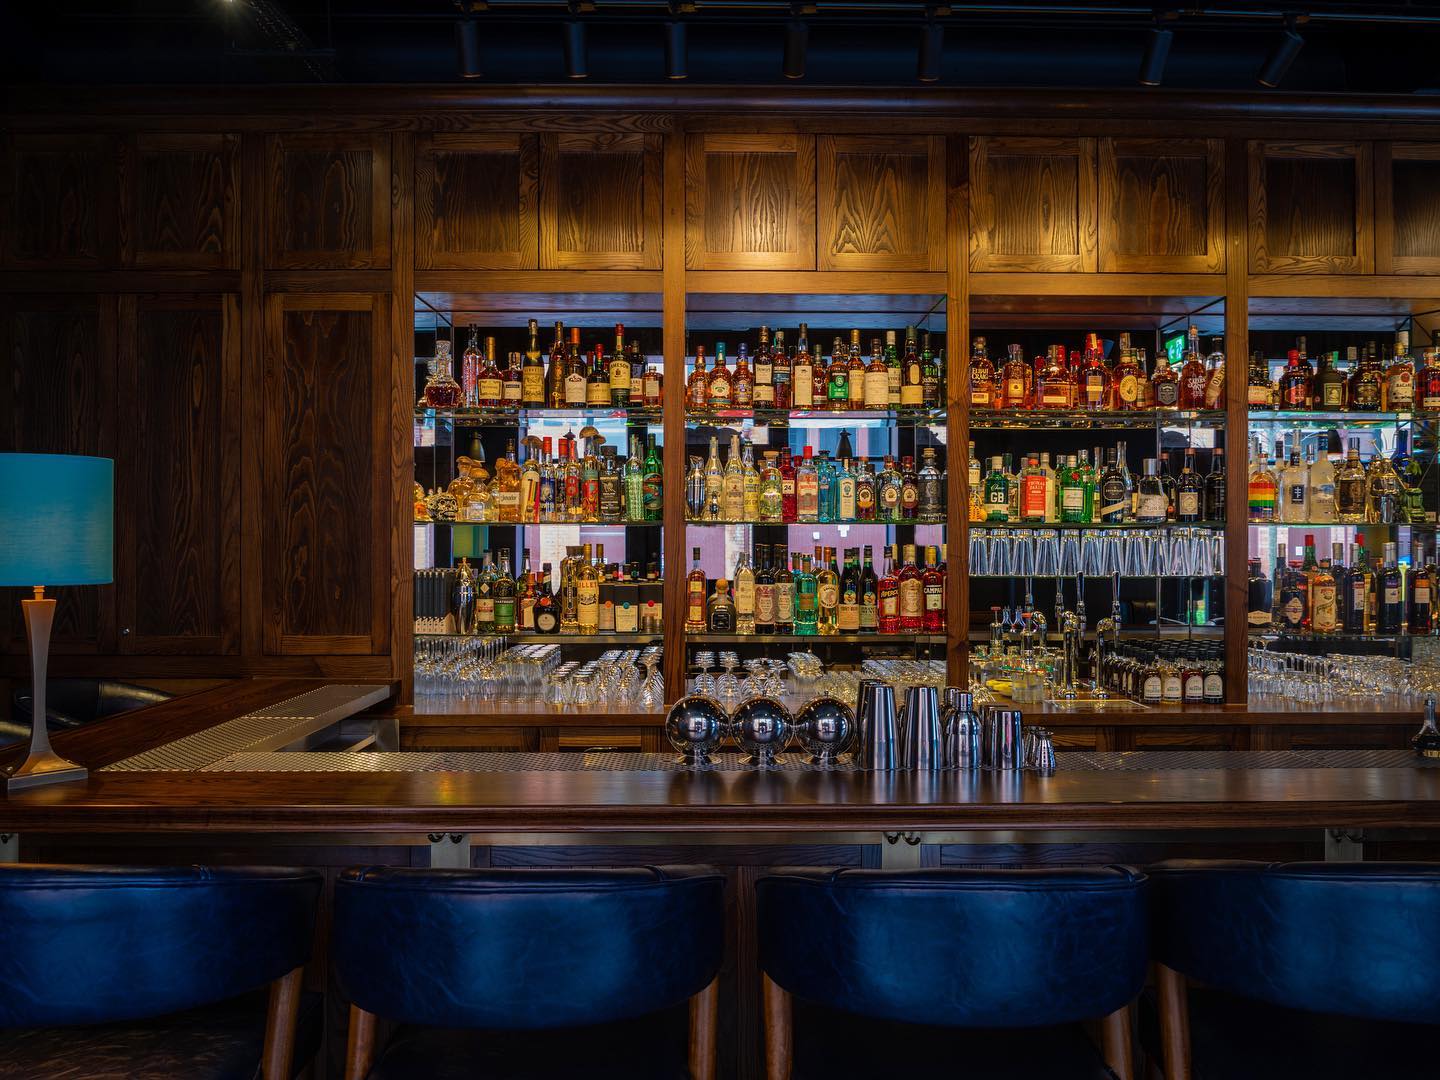 The best cocktail bars in the UK have been revealed &#8211; and two are in Manchester, The Manc